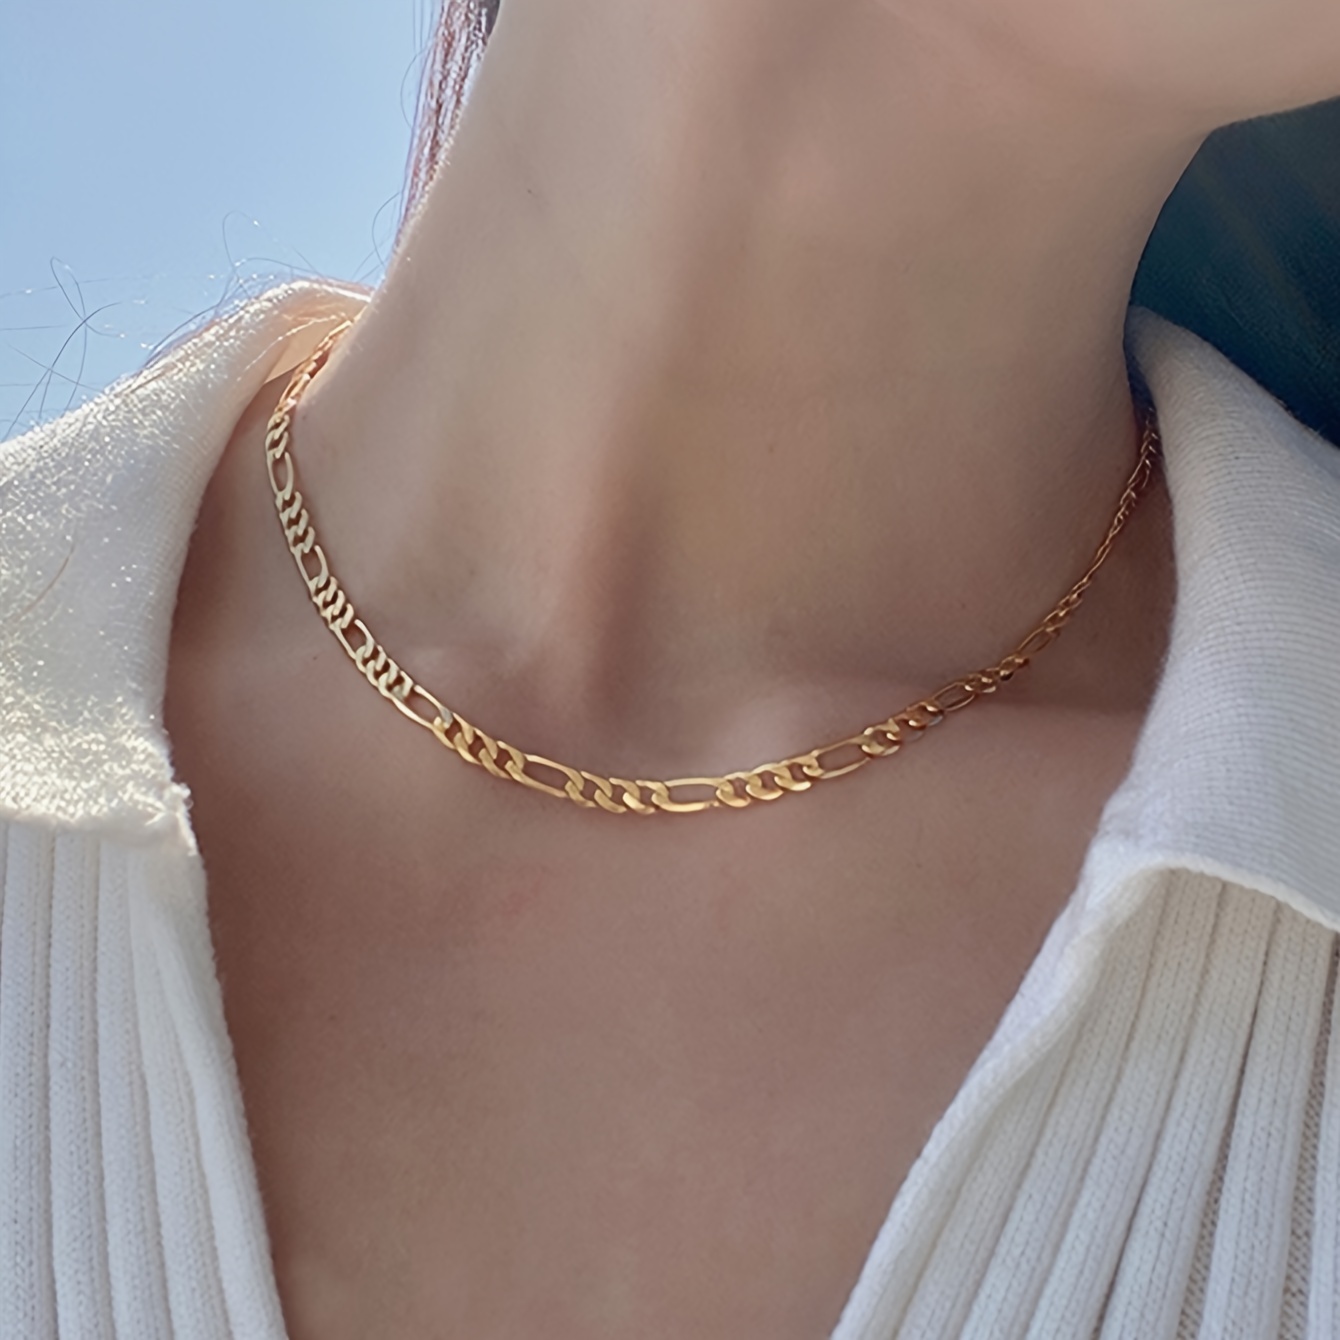 Lava Shape Linked Irregular Choker Necklace Twisted 18K Gold Plated Necklaces for Women Vintage Statement Jewelry Gold Chunky Links Necklace